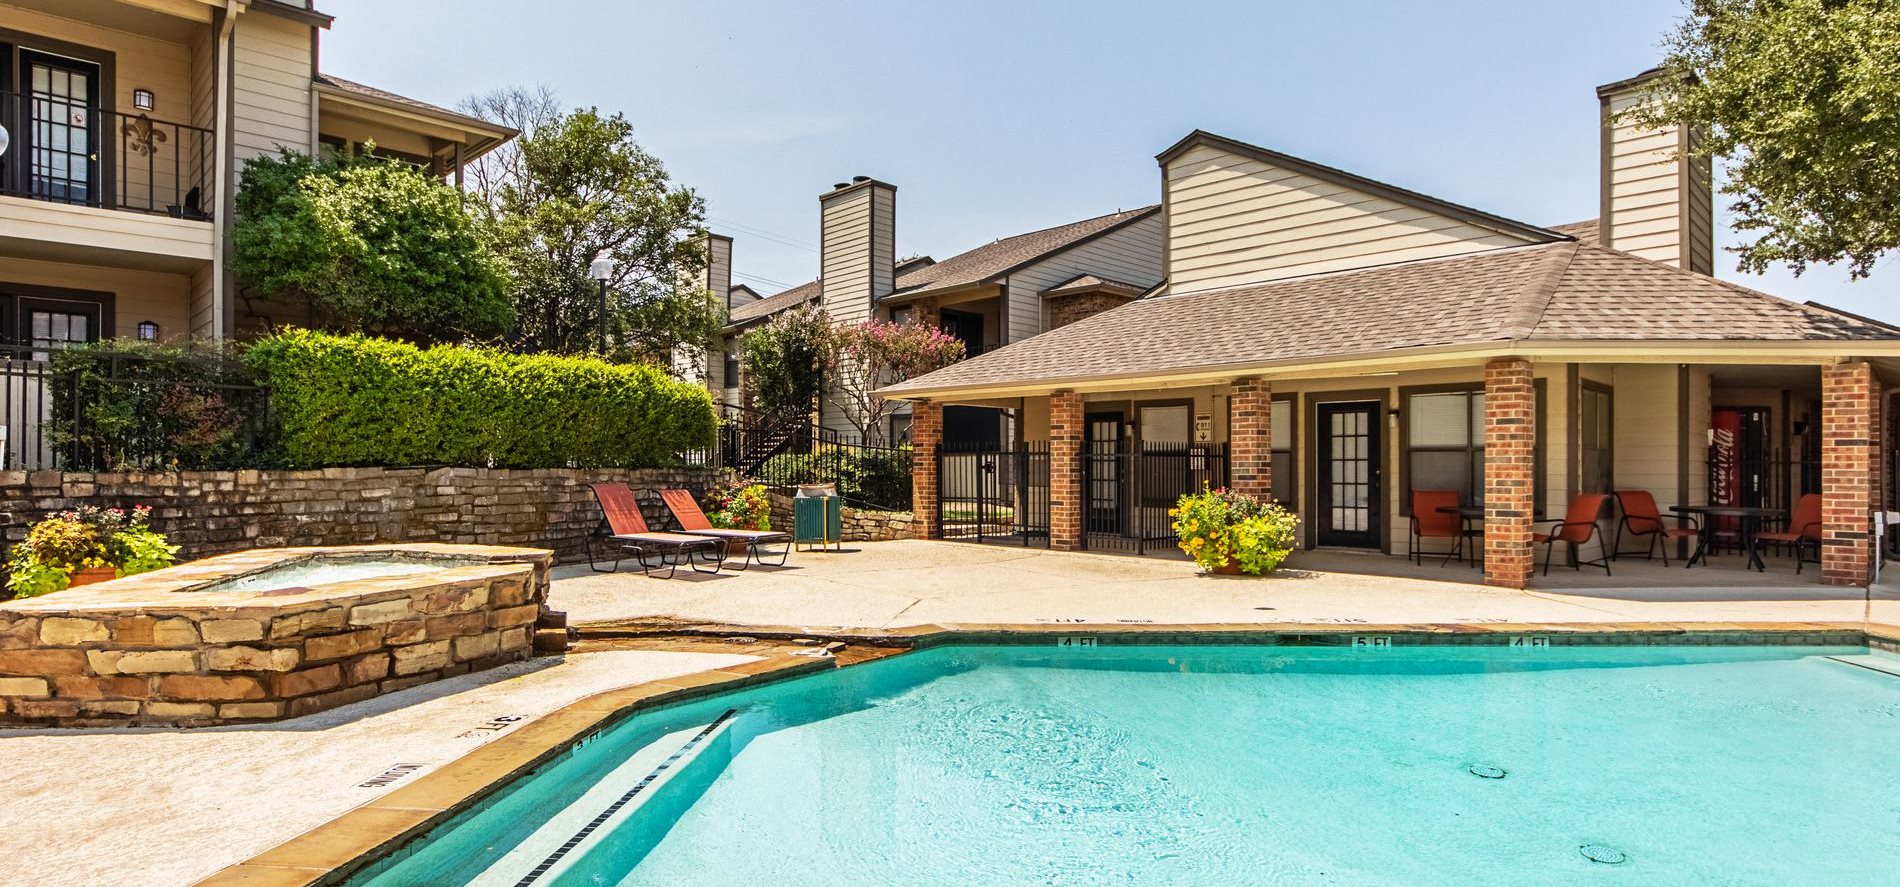 Swimming Pool at Woodmeade Apartments in Irving, Texas, TX